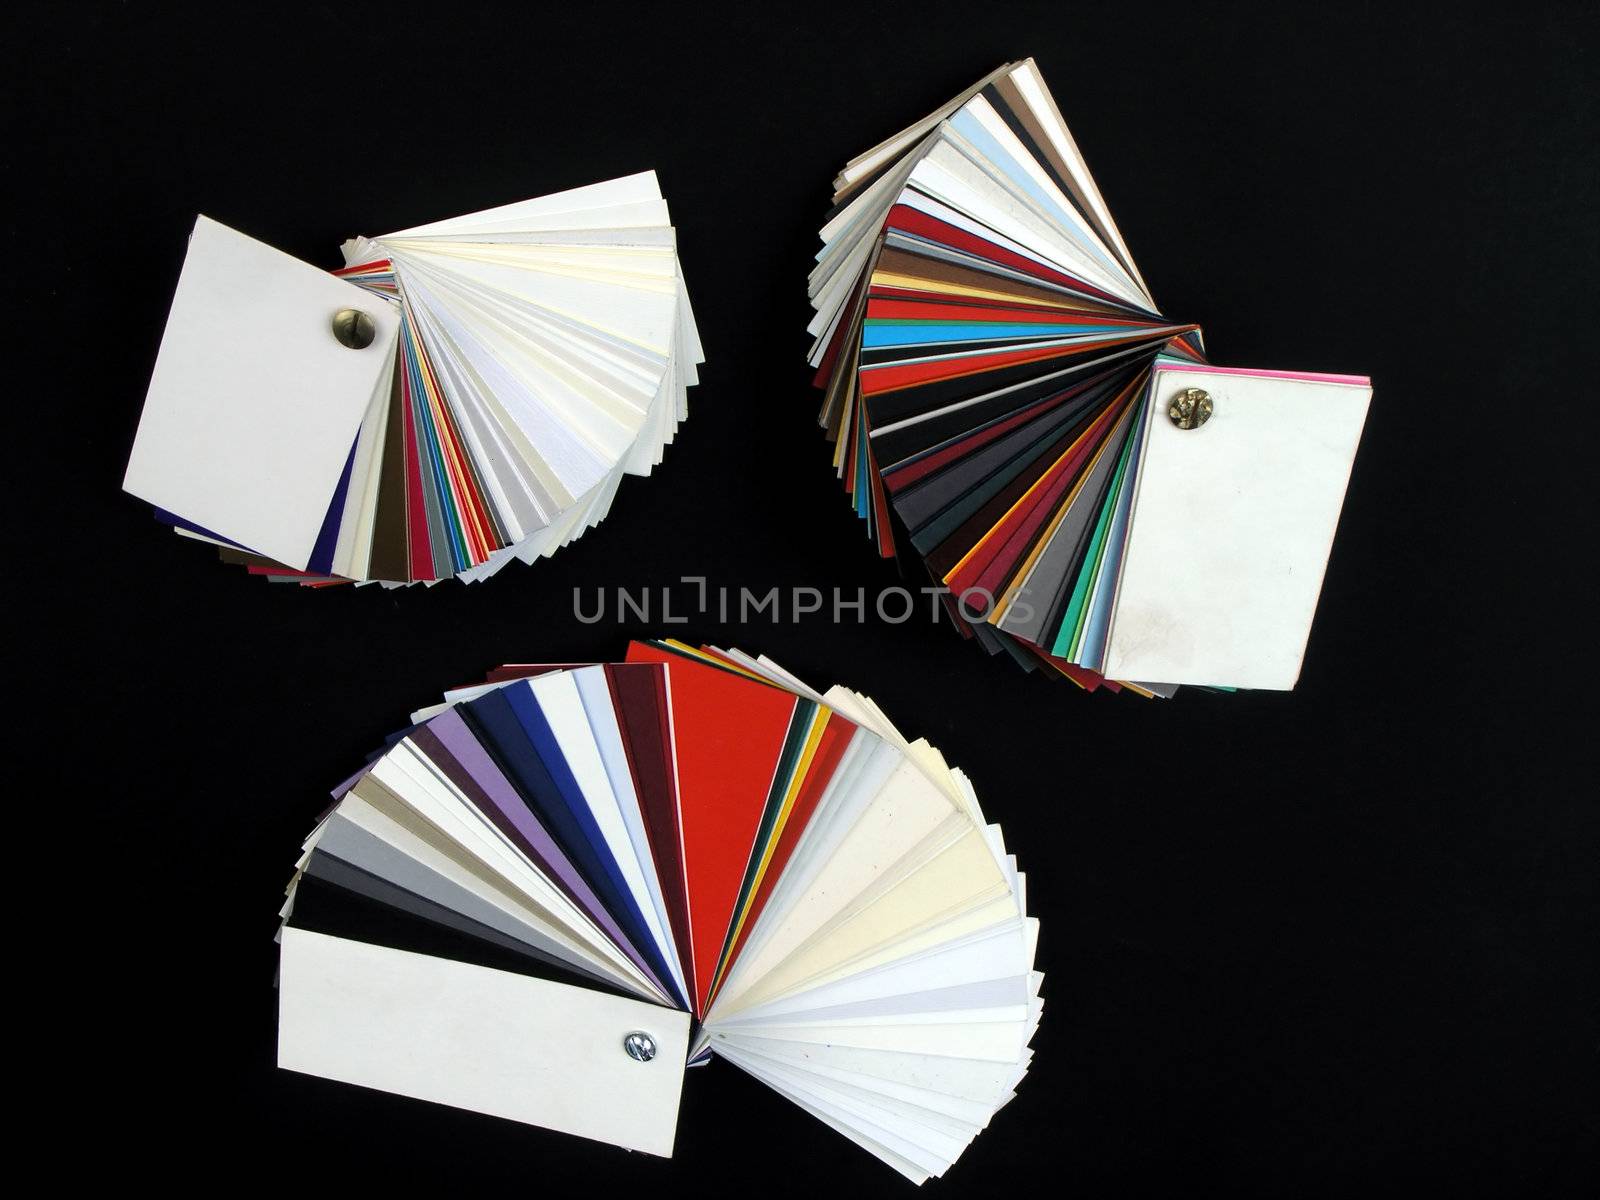 Colored samples of different papers on black background